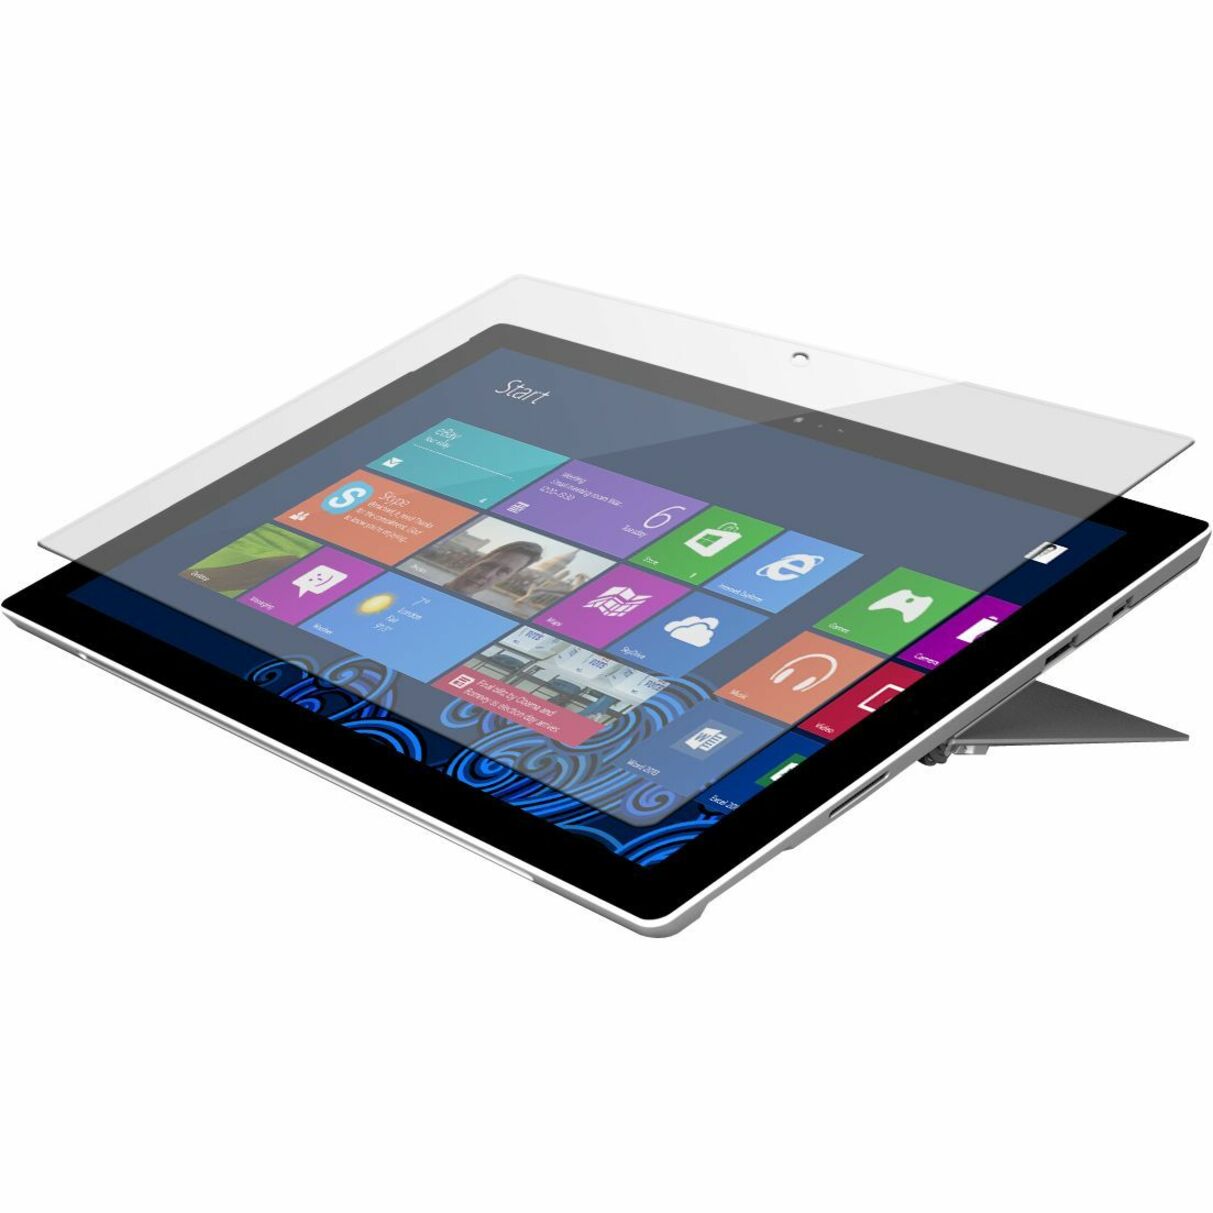 Targus AWV1290USZ Tempered Glass Screen Protector for Microsoft Surface Pro 4, Clear, Easy to Apply/Remove, Bubble-free, 9H Hardness